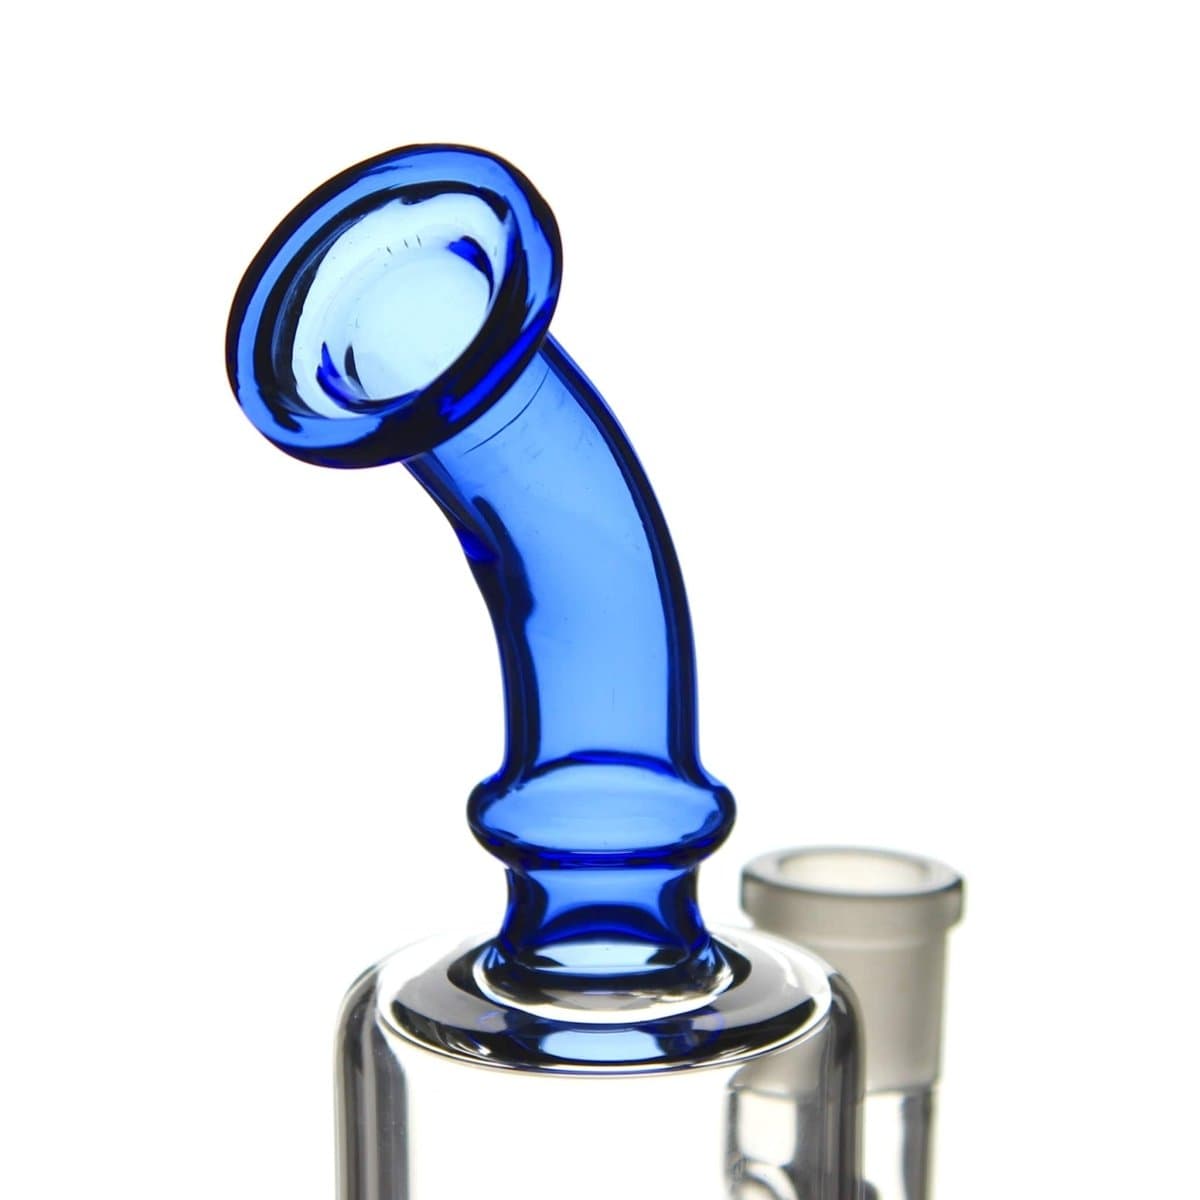 Benext Generation Glass The Jammer Tree Perc Dab Rig